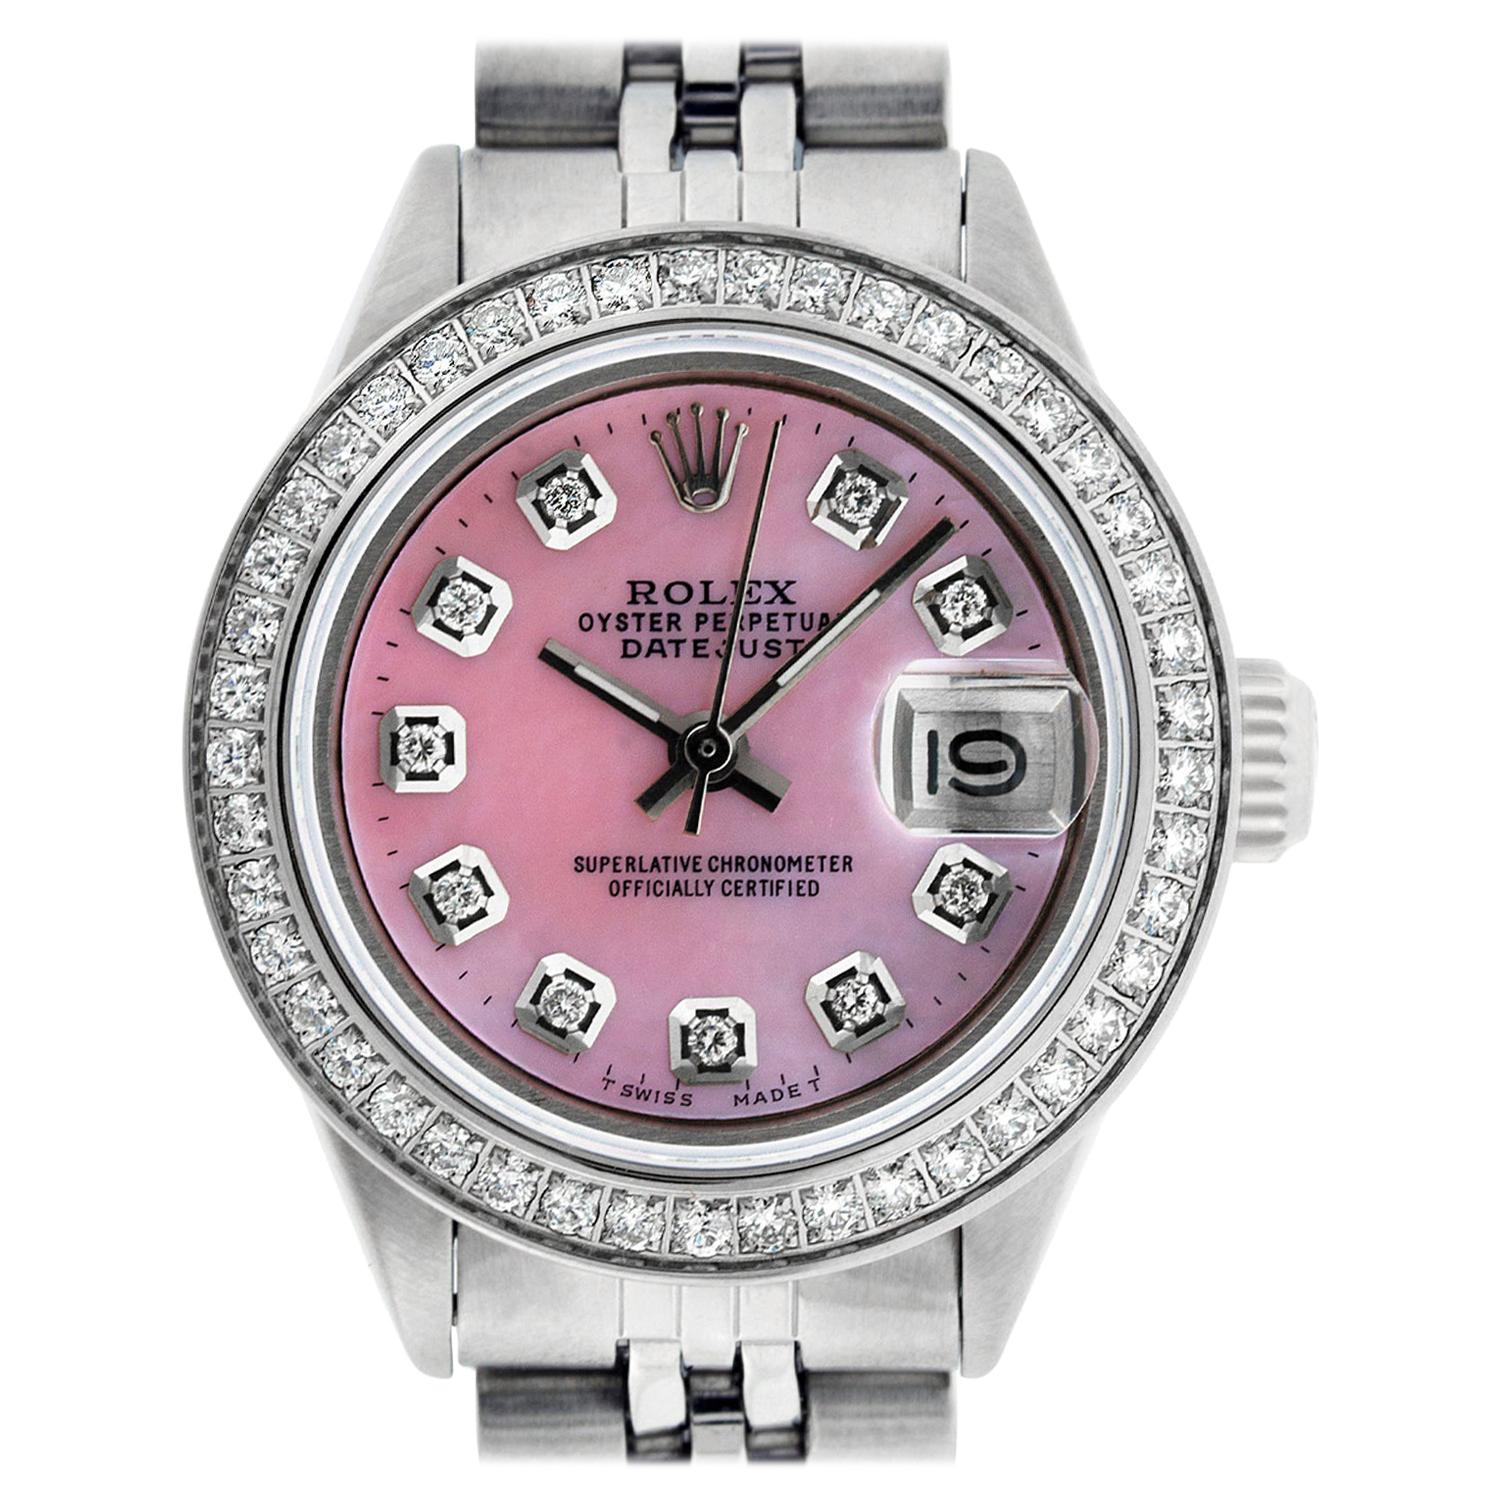 Rolex Women's Datejust Watch Stainless Steel Pink Mother of Pearl Diamond Dial